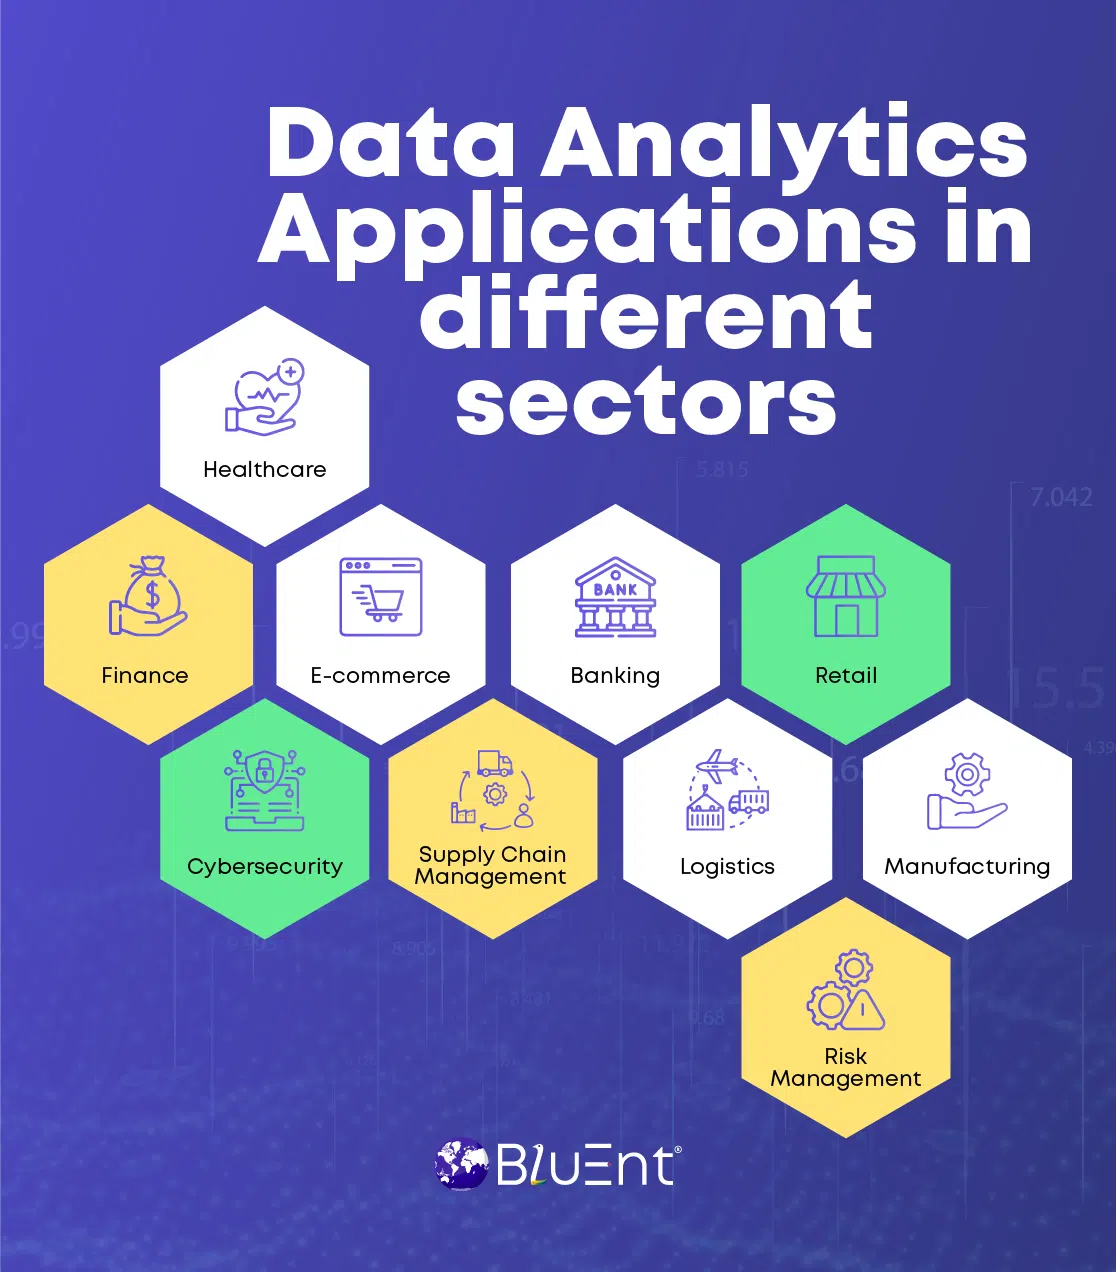 Data Analytics Applications in different sectors